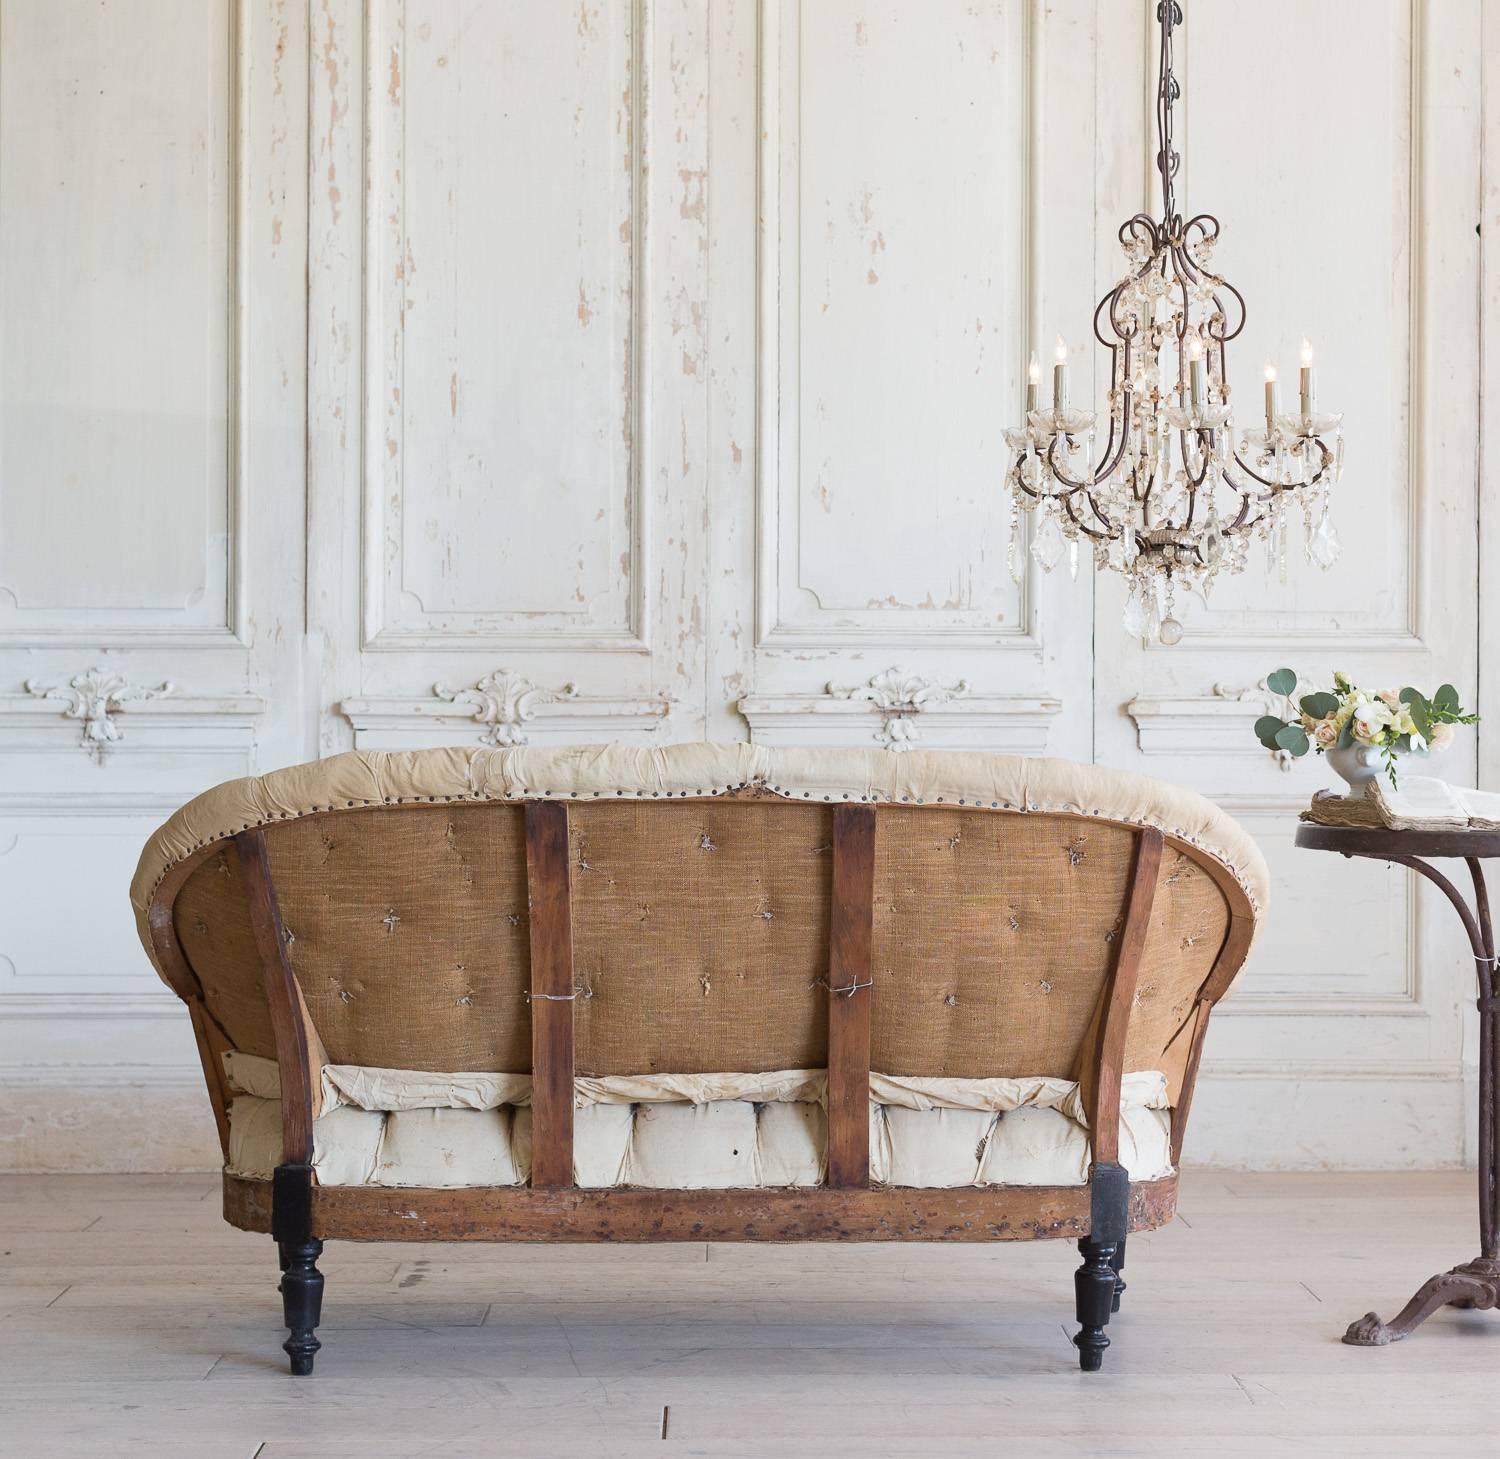 Incredible tufted antique loveseat in original muslin with black legs. The firm cushions provide a balanced and comfortable seating option while the piece itself lends a topic of conversation for a library or small nook.